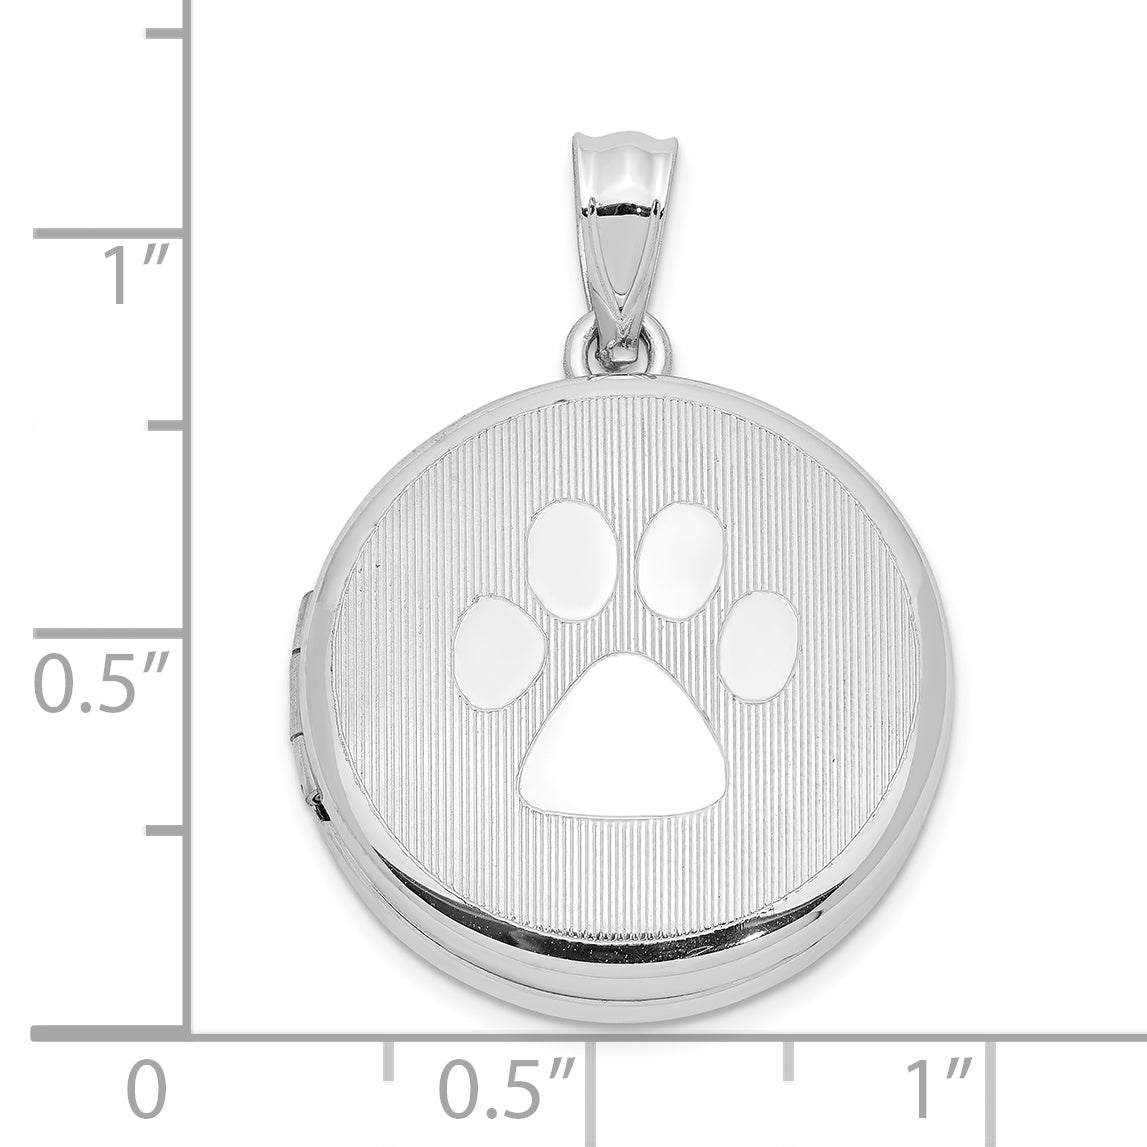 Sterling Silver Rhodium 20mm Grooved & Polished Pawprint Round Locket